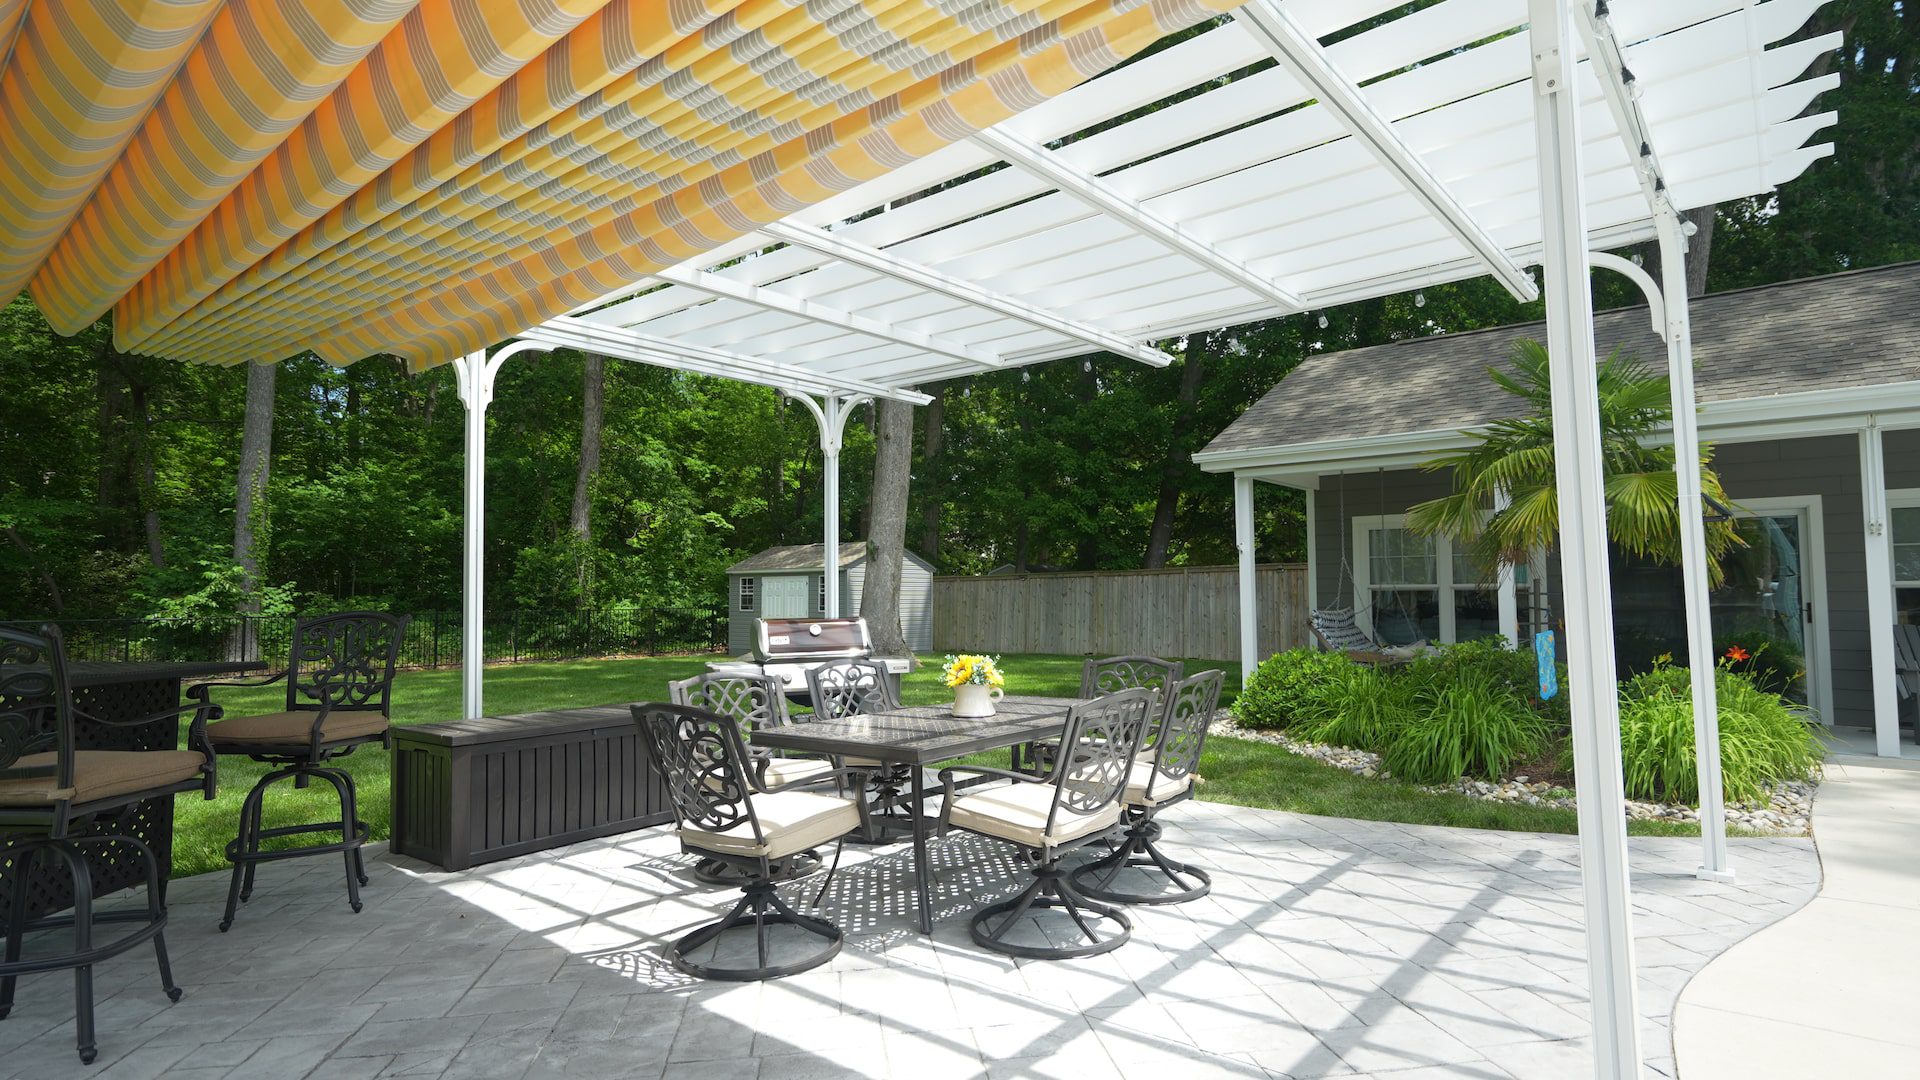 Pergola Canopy slightly extended over patio dining set - ECCO Sunroom & Awning